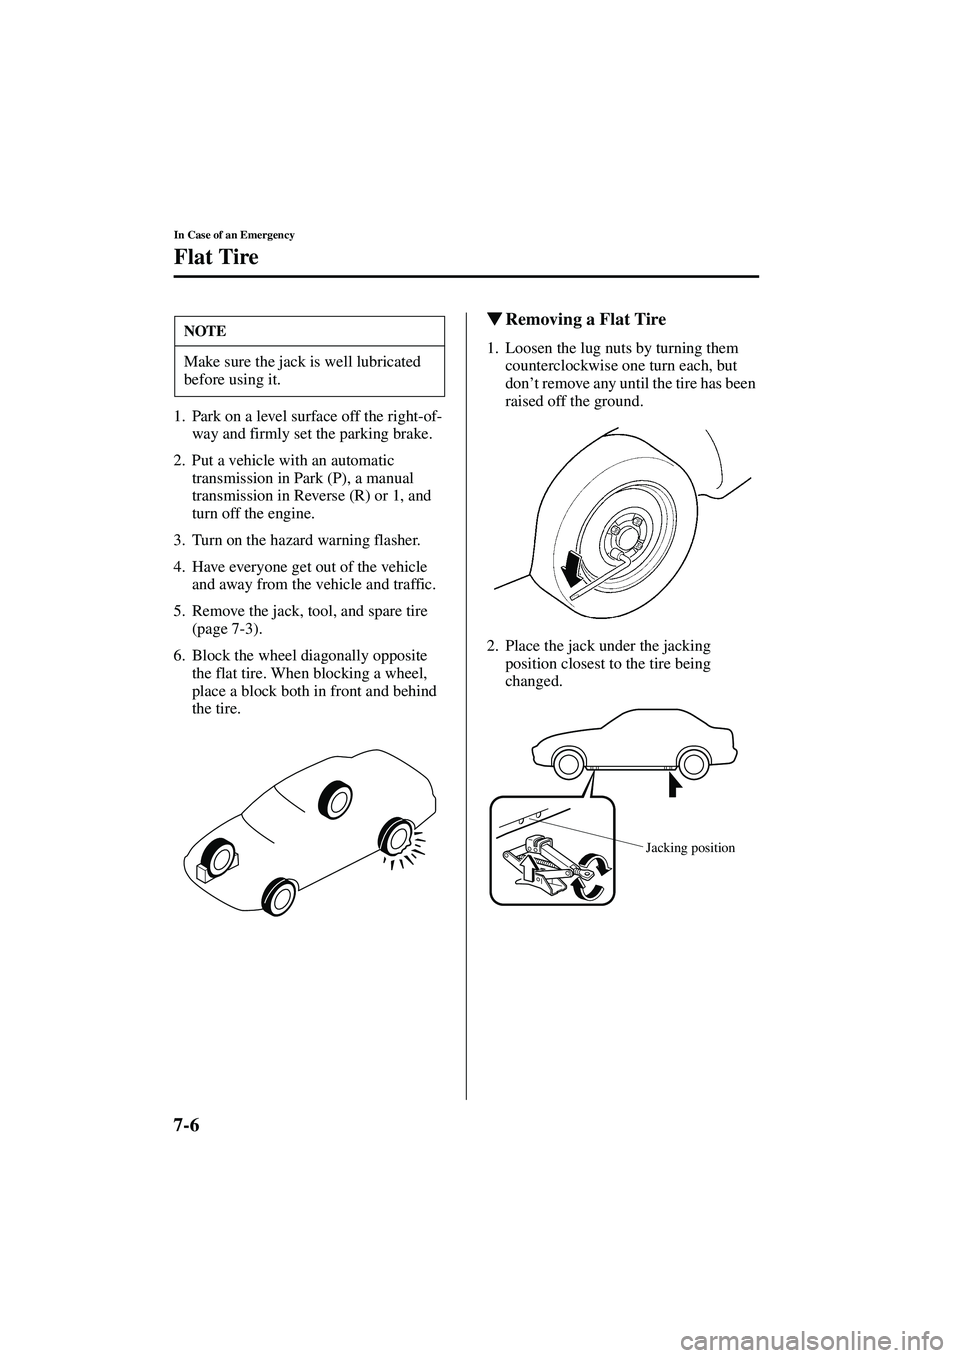 MAZDA MODEL MX-5 MIATA 2003 User Guide 7-6
In Case of an Emergency
Flat Tire
Form No. 8R09-EA-02G
1. Park on a level surface off the right-of-way and firmly set the parking brake.
2. Put a vehicle with an automatic  transmission in Park (P